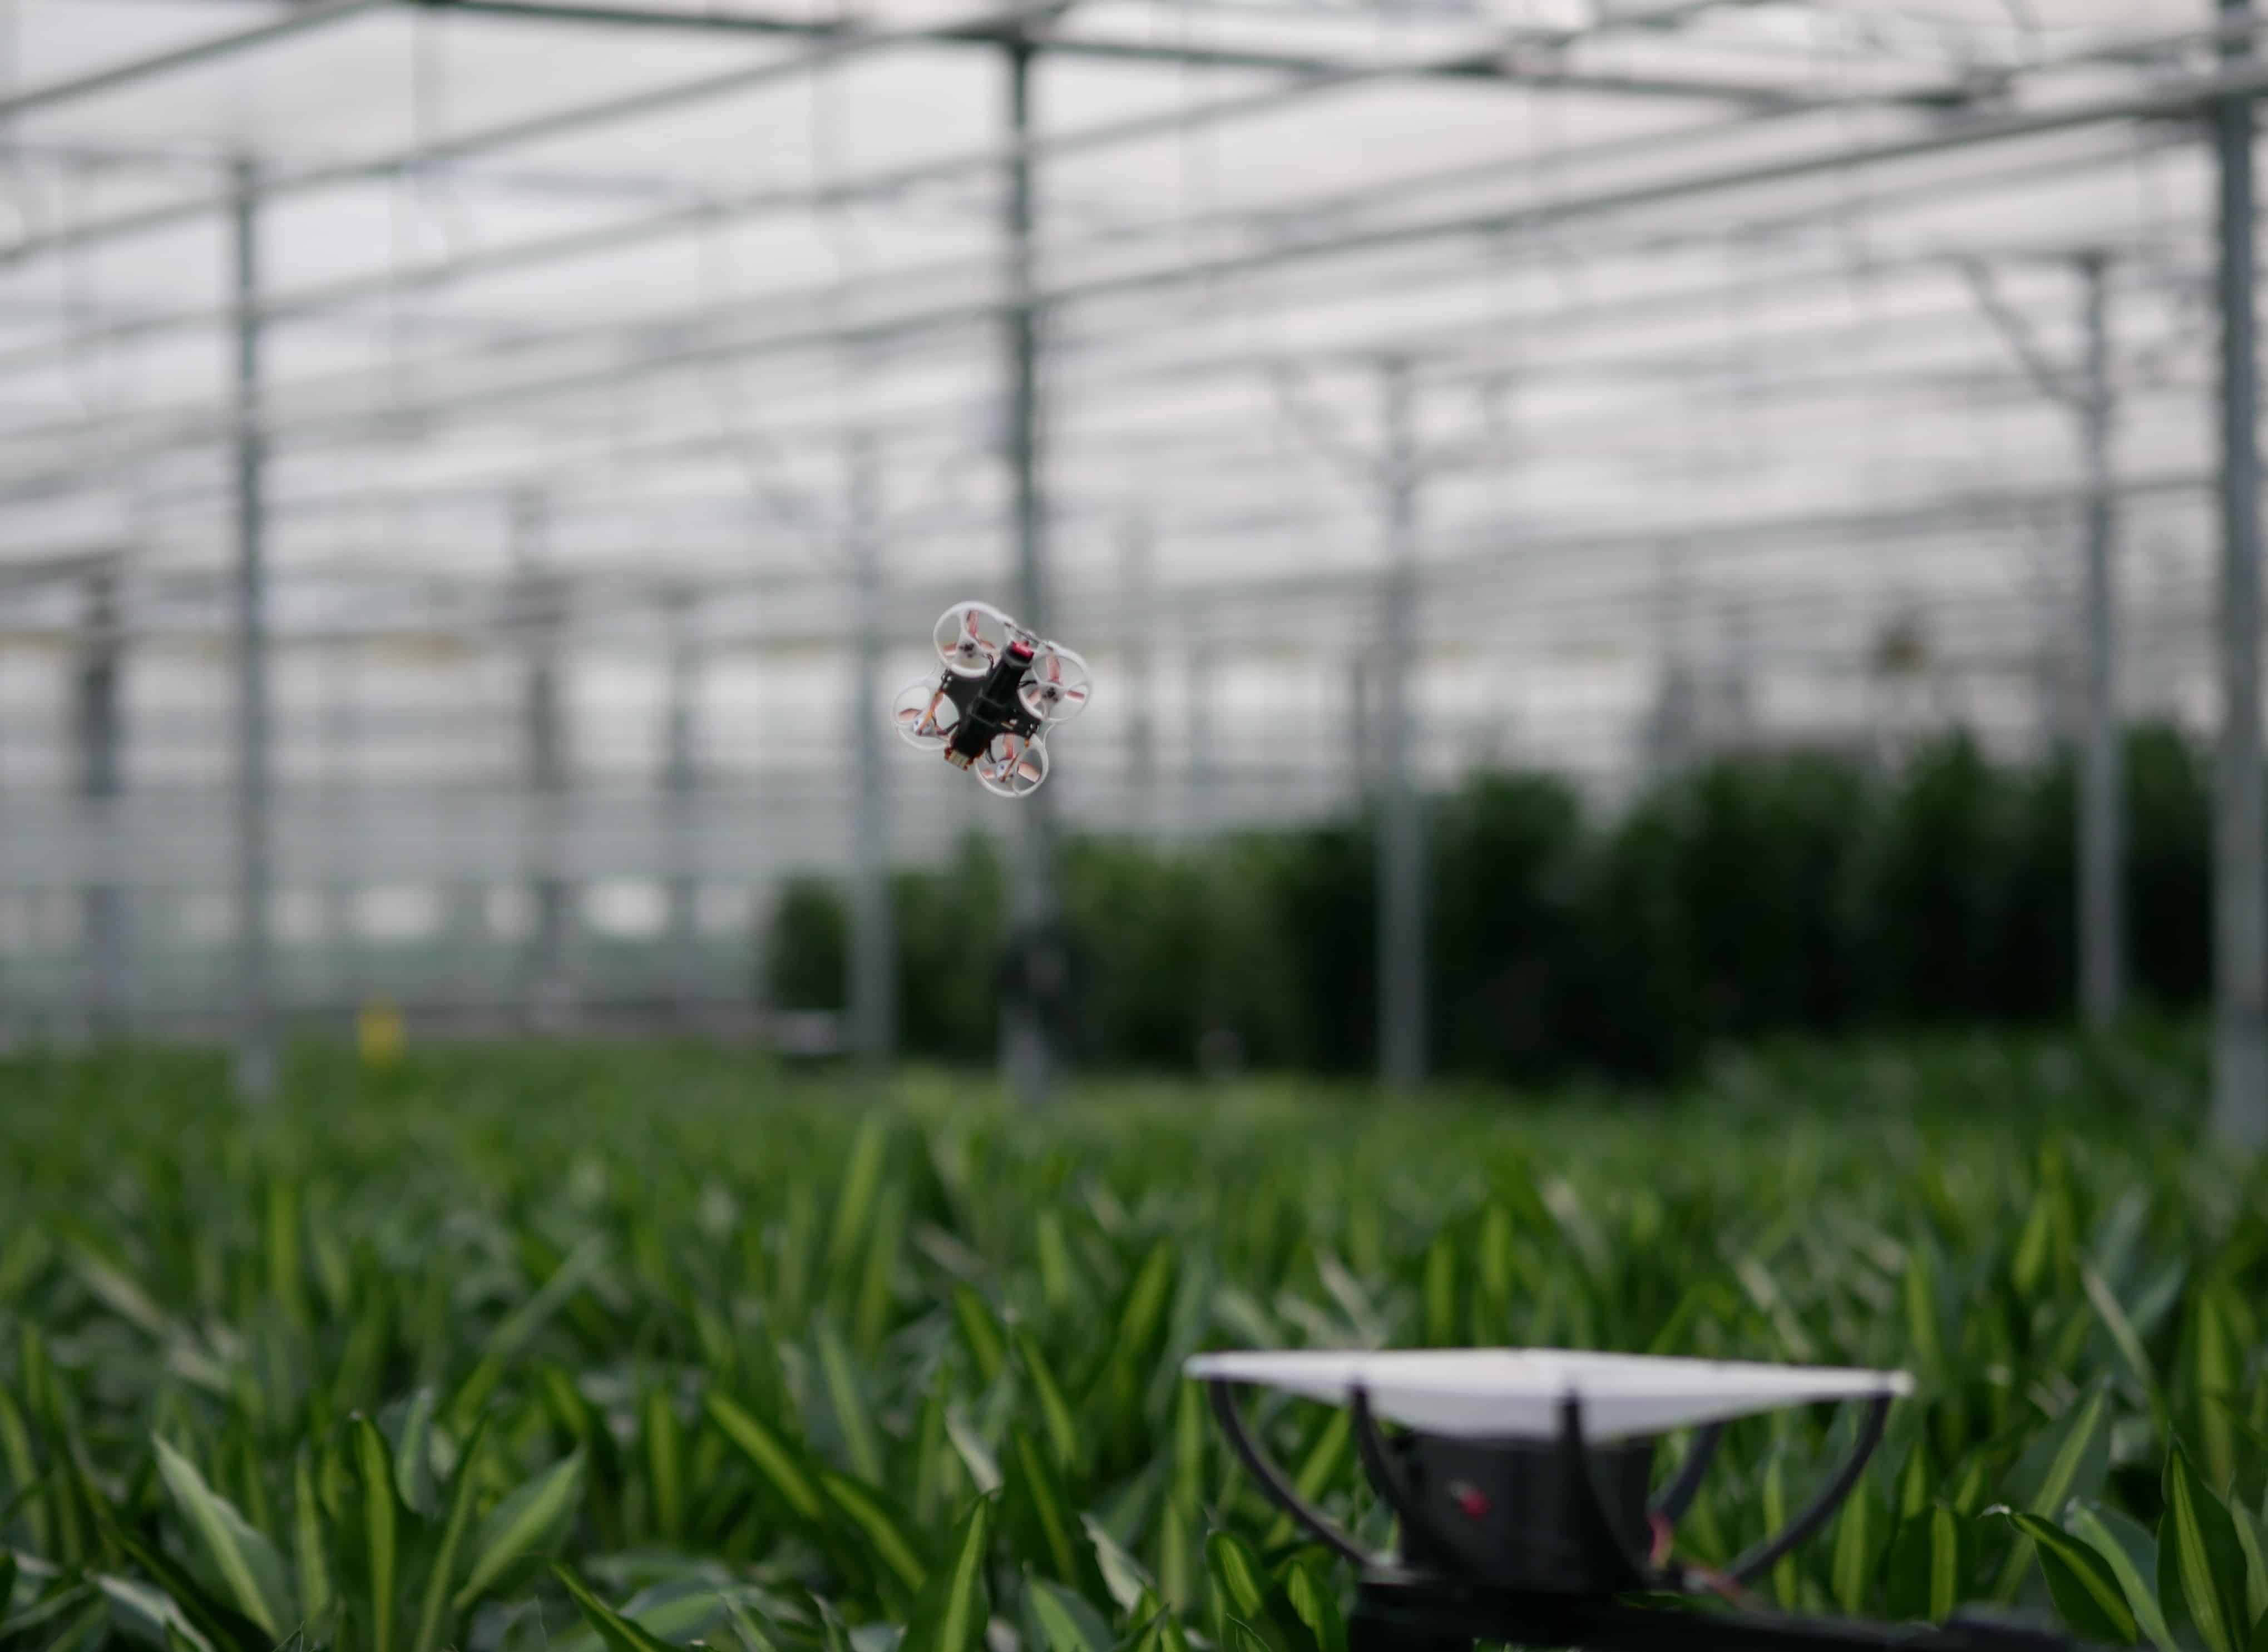 Cameras, sensors, and drones: this is how PATS is disrupting pest control in greenhouses